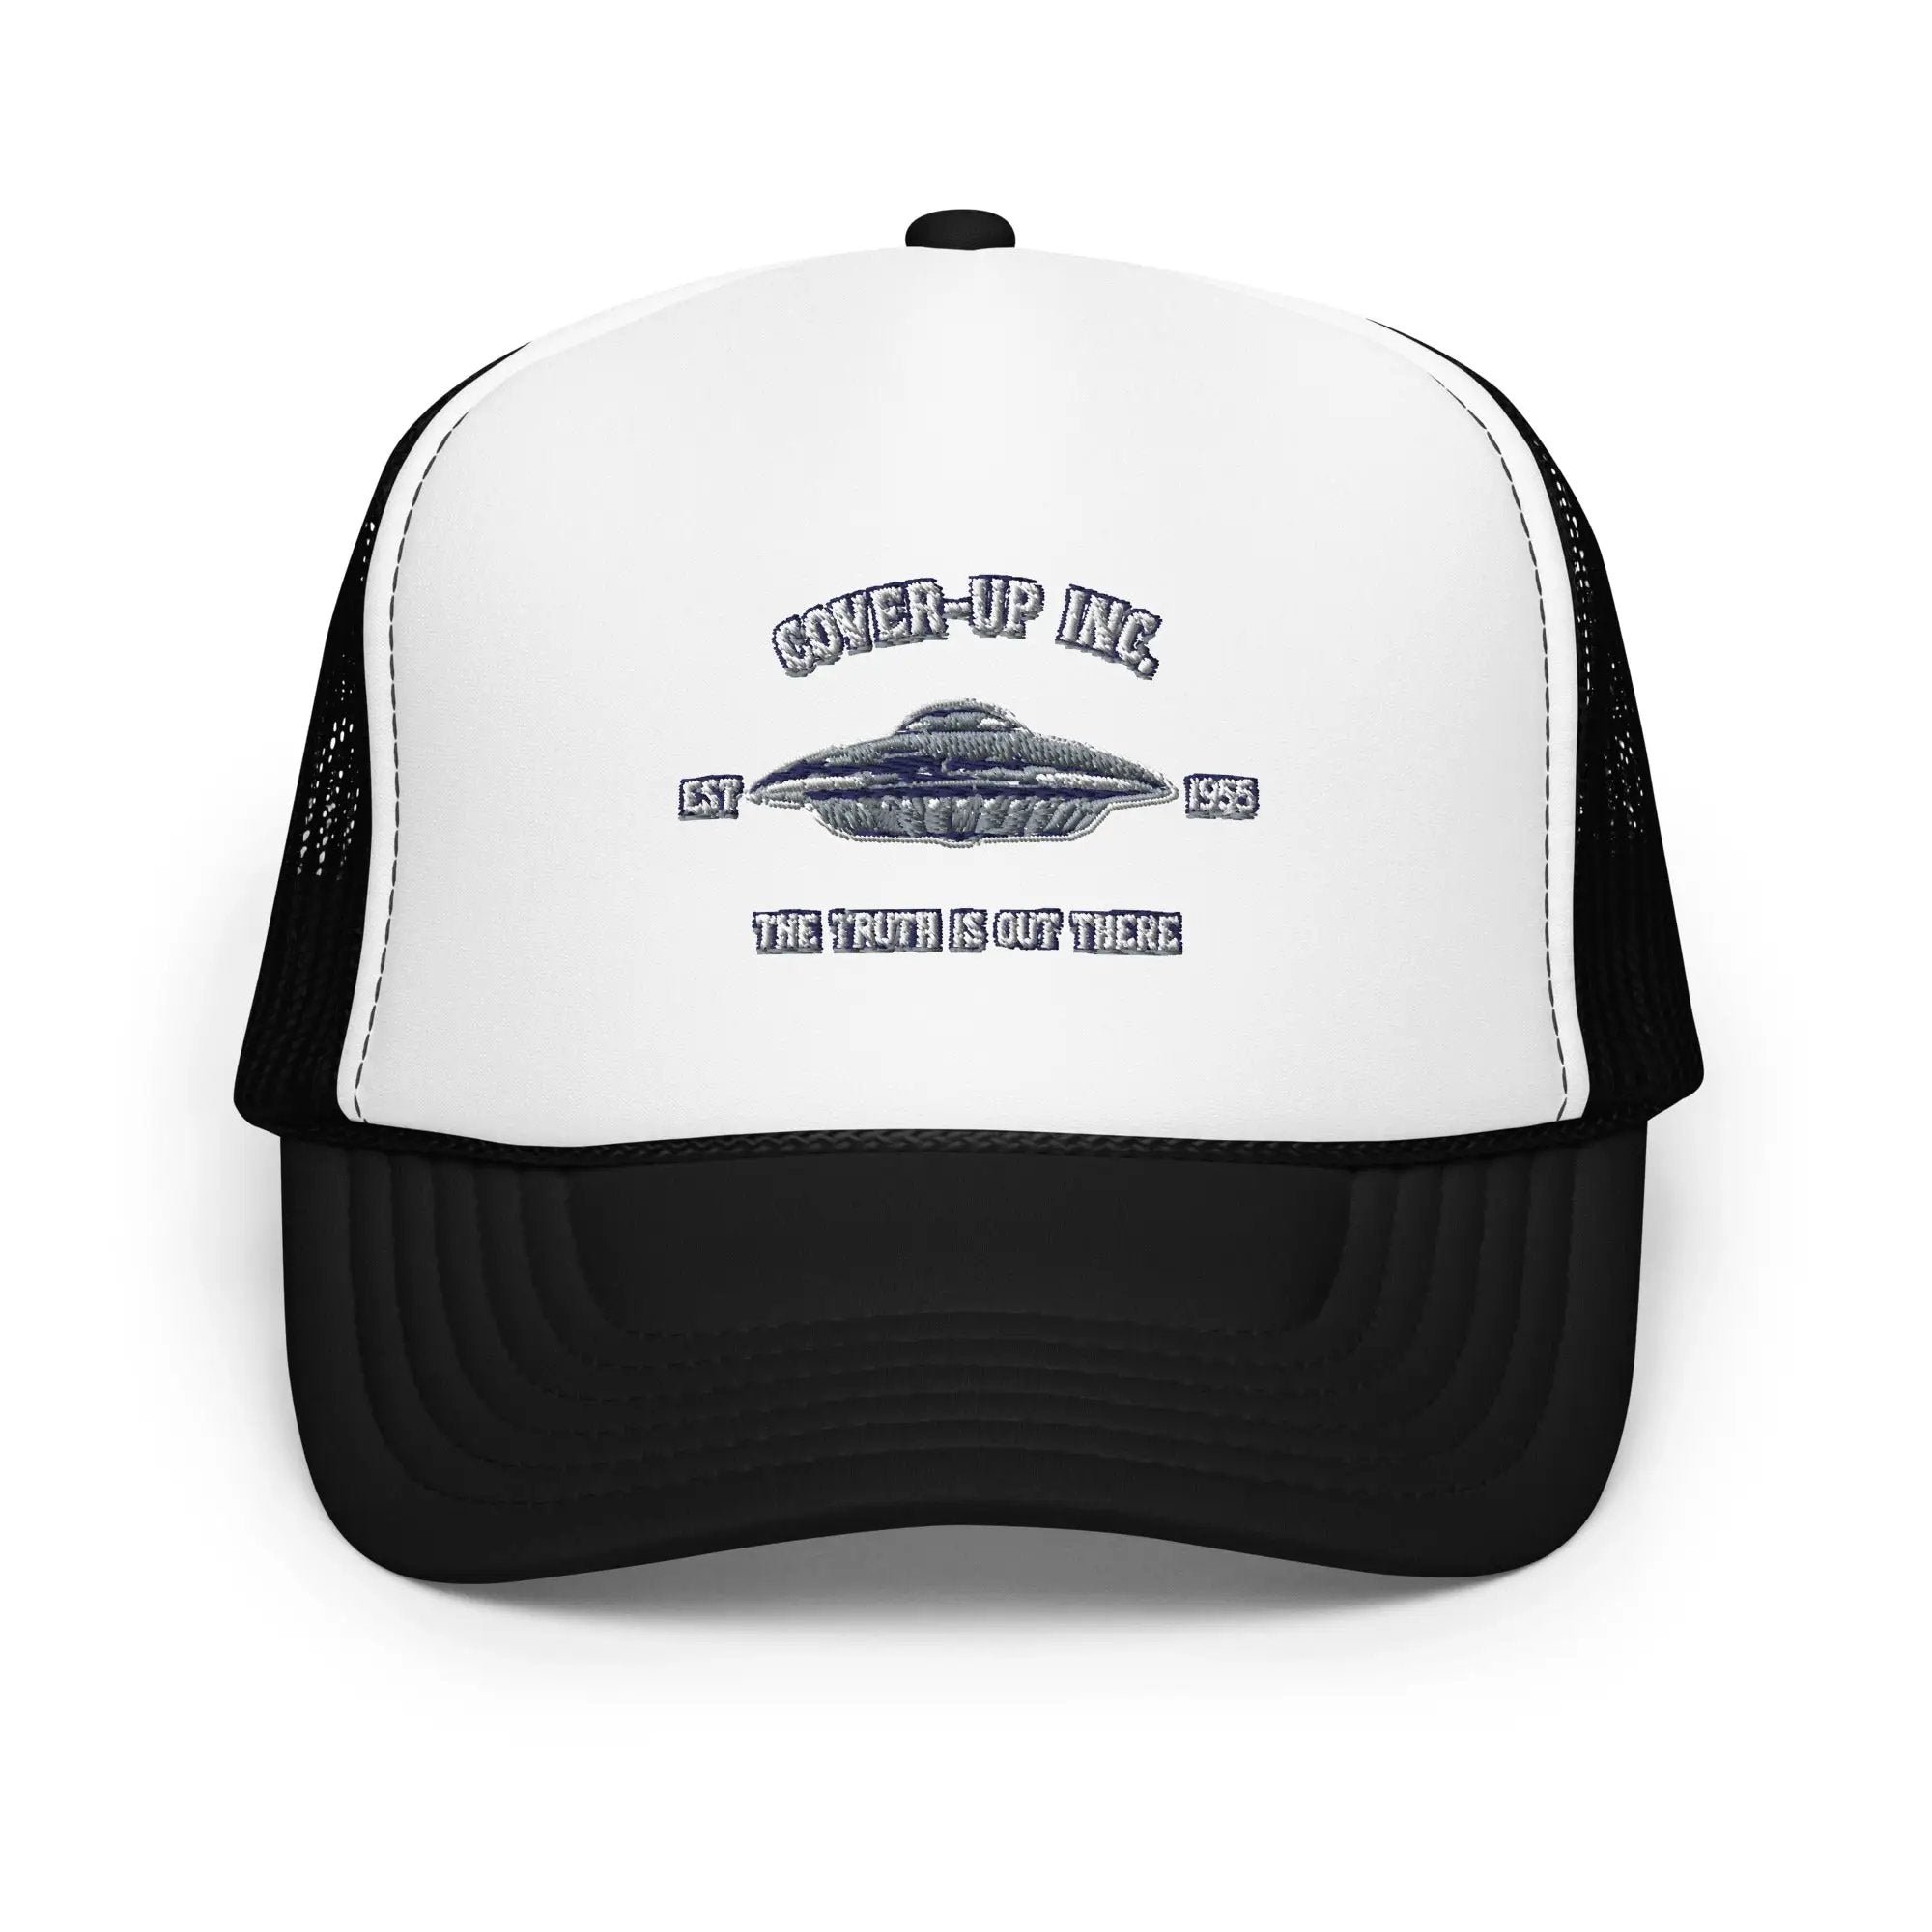 a white and black trucker hat with a black mesh back